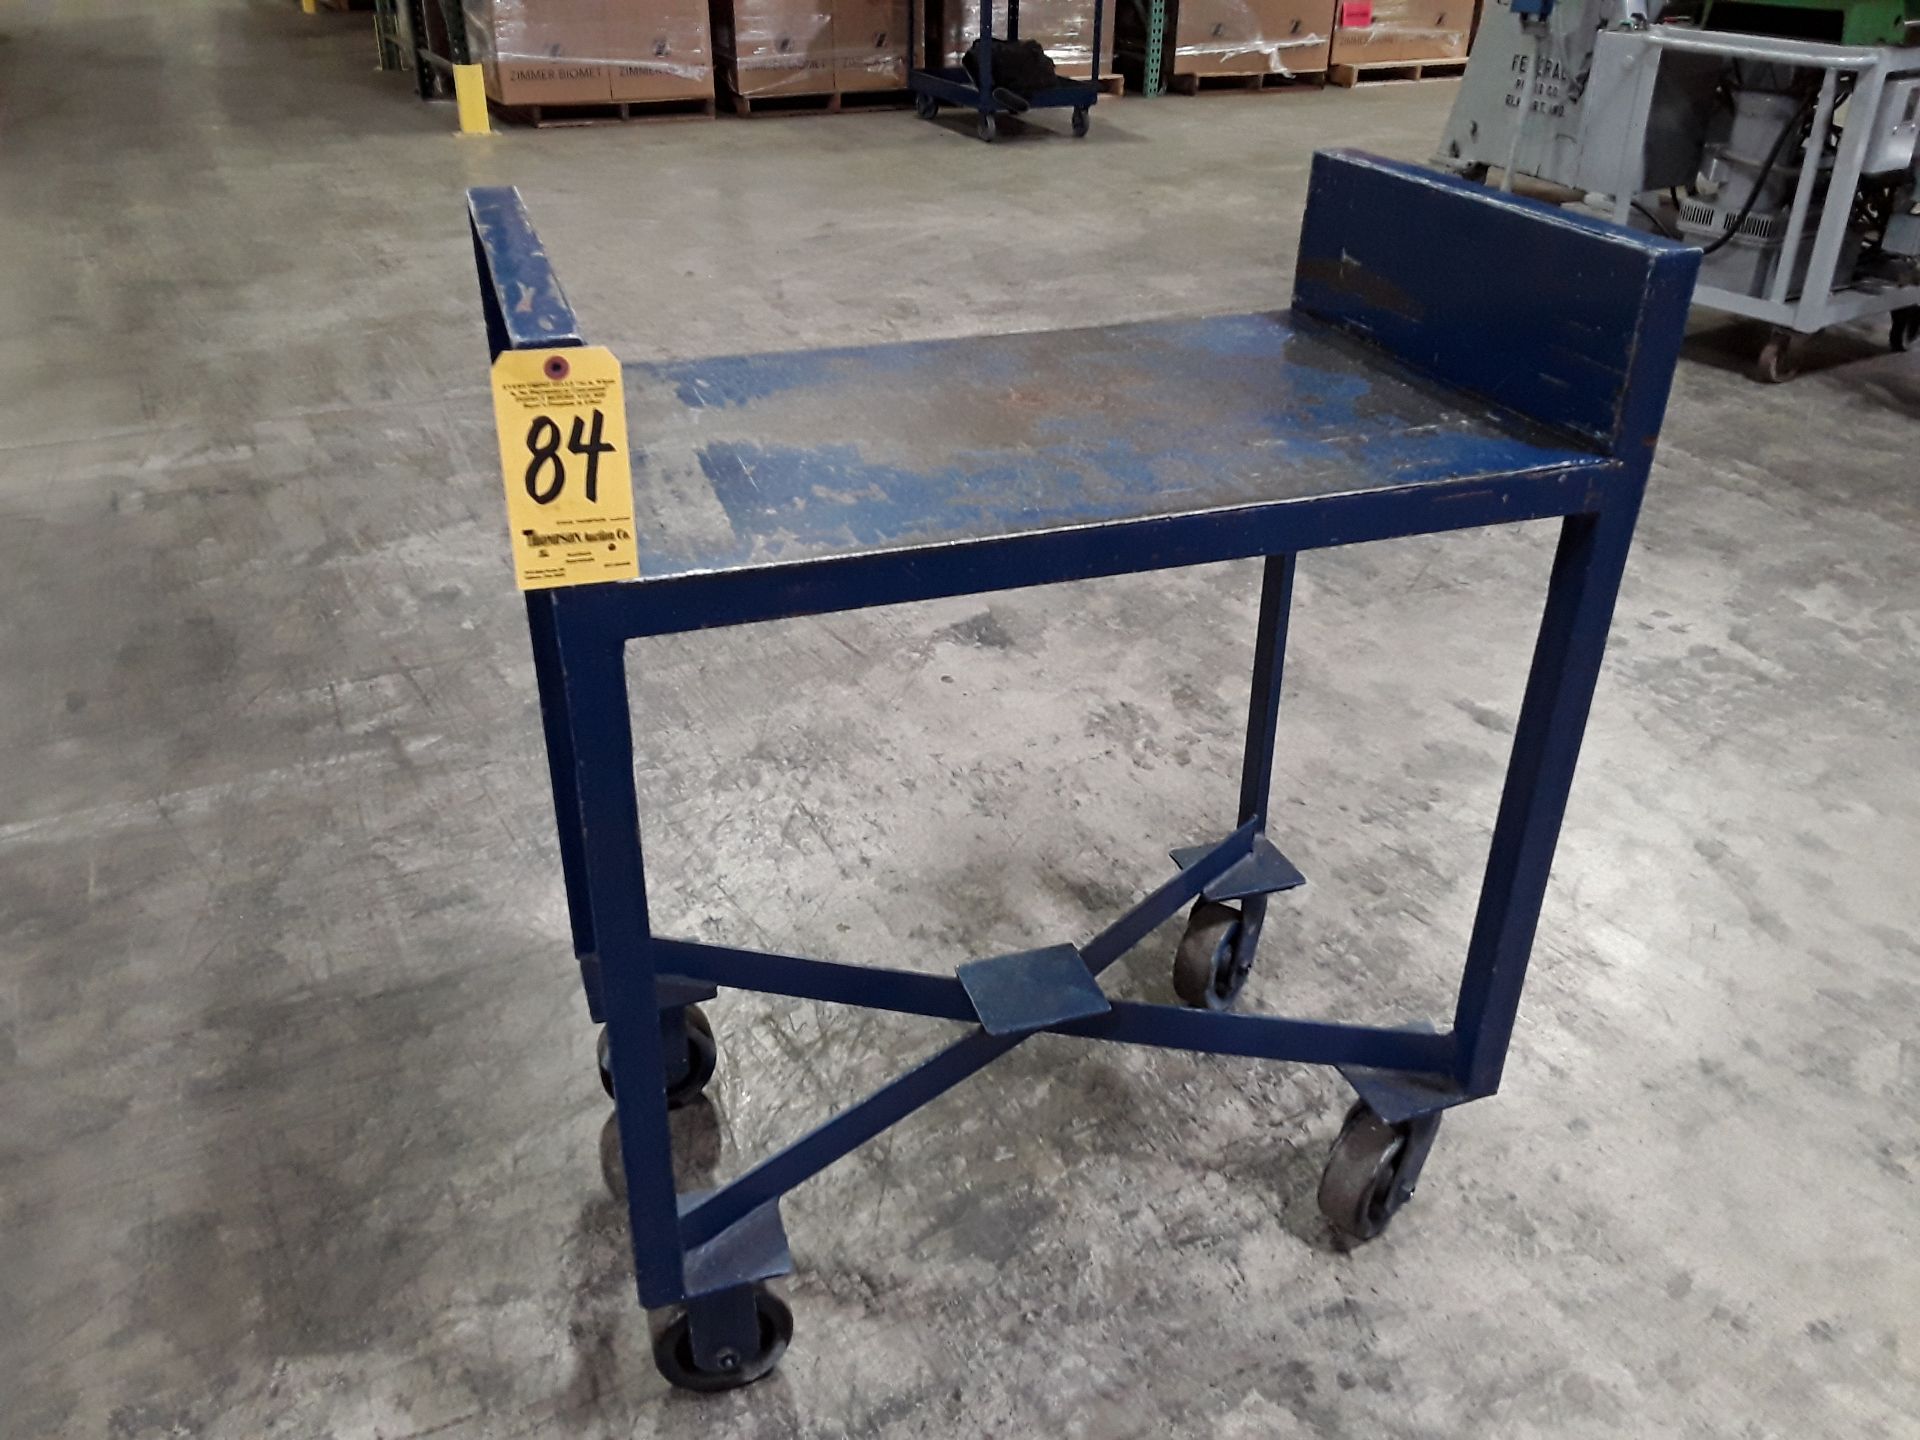 Shop Cart, Address for Inspection and Pick Up 3040 N. Wooster Ave., Dover, Ohio